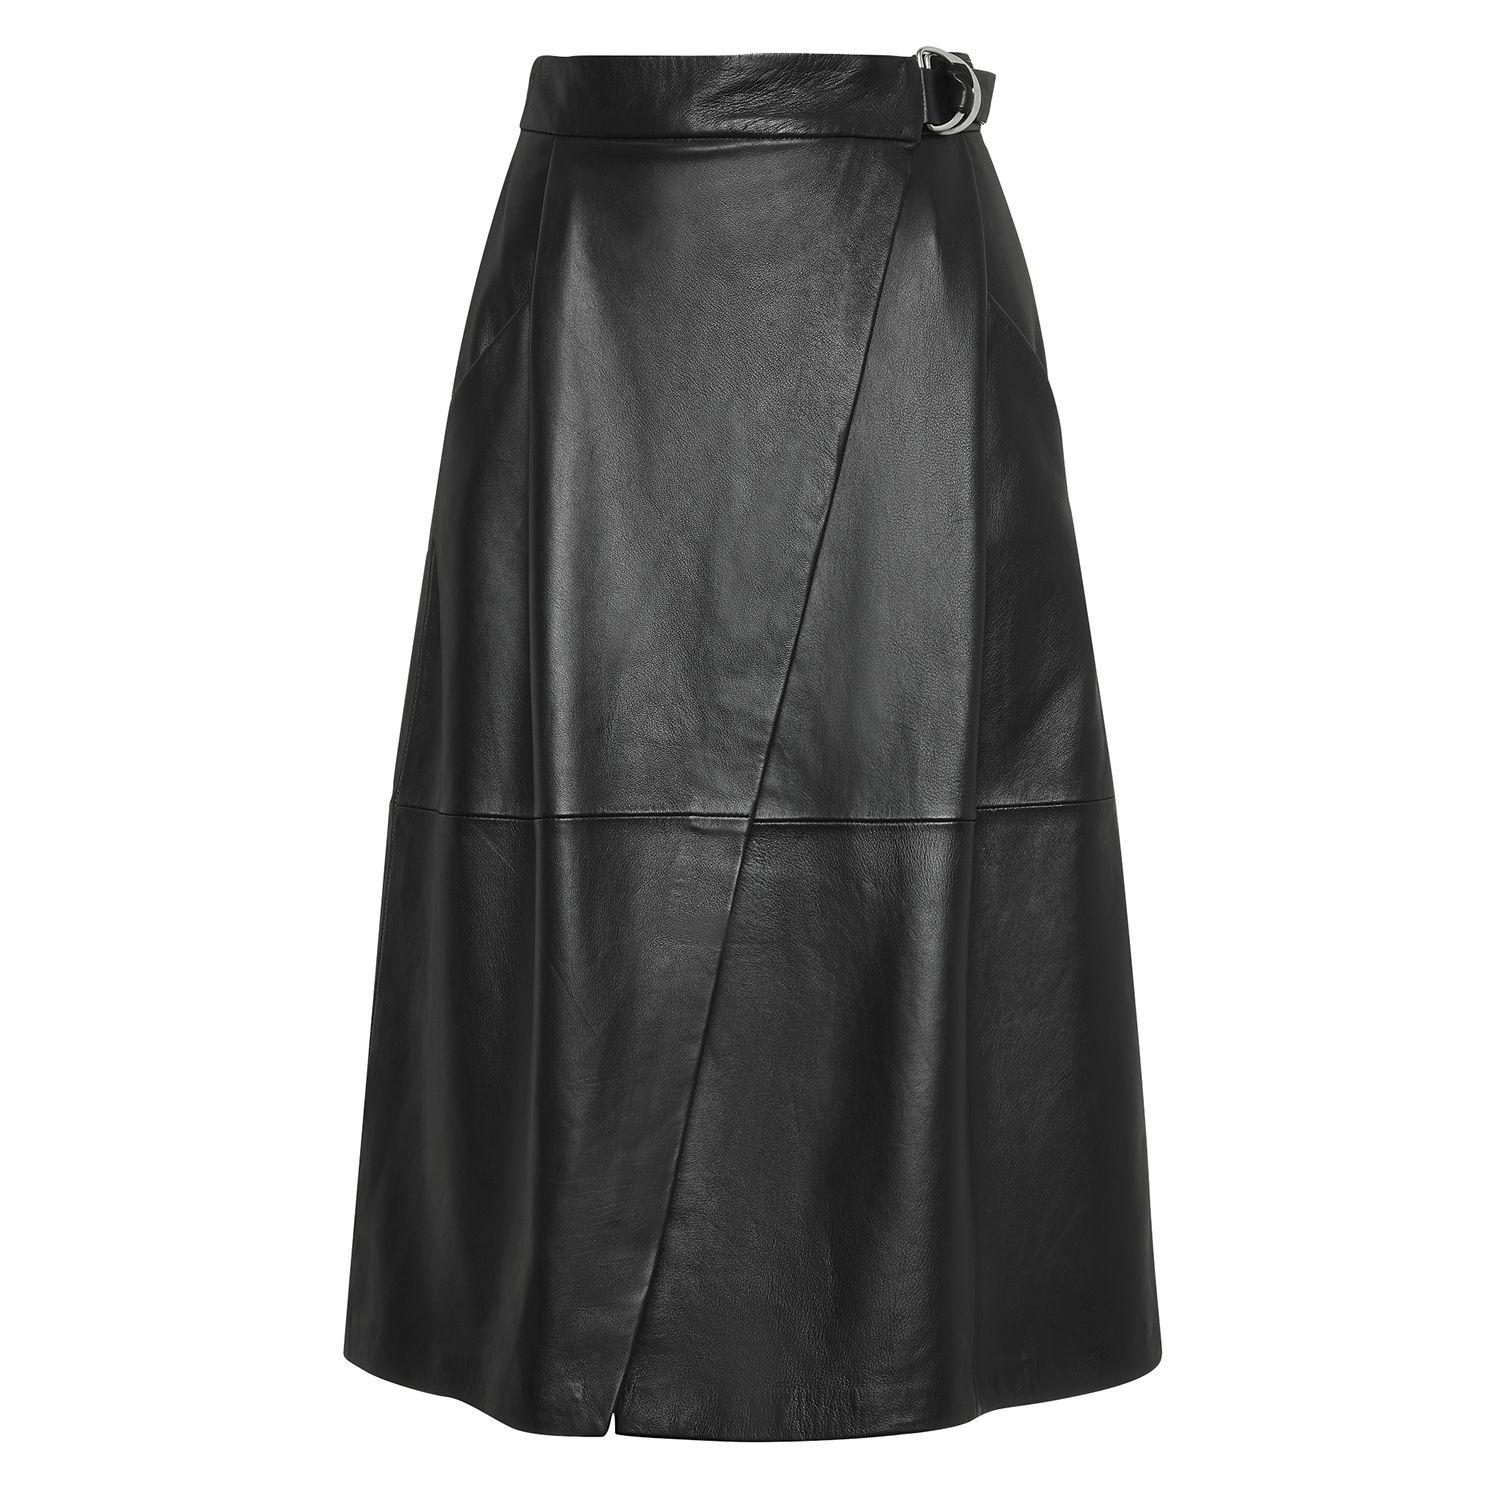 Lyst - Whistles Wrap Leather Midi Skirt in Black - Save 80.64620355411955%